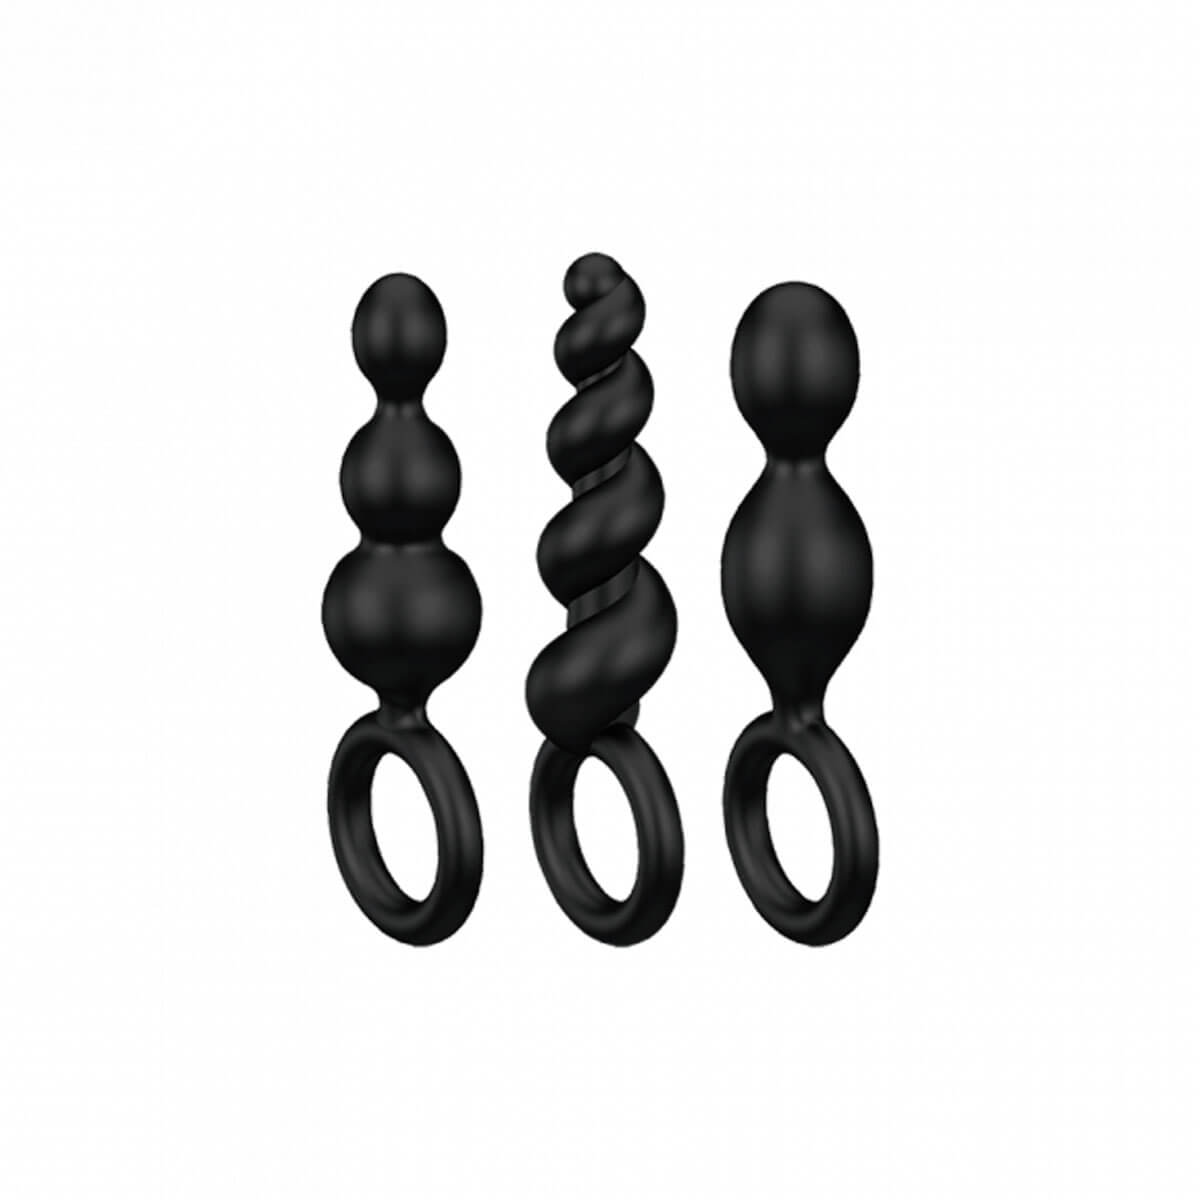 Set of three black soft silicone butt plugs with different shapes by Satisfyer Nudie Co